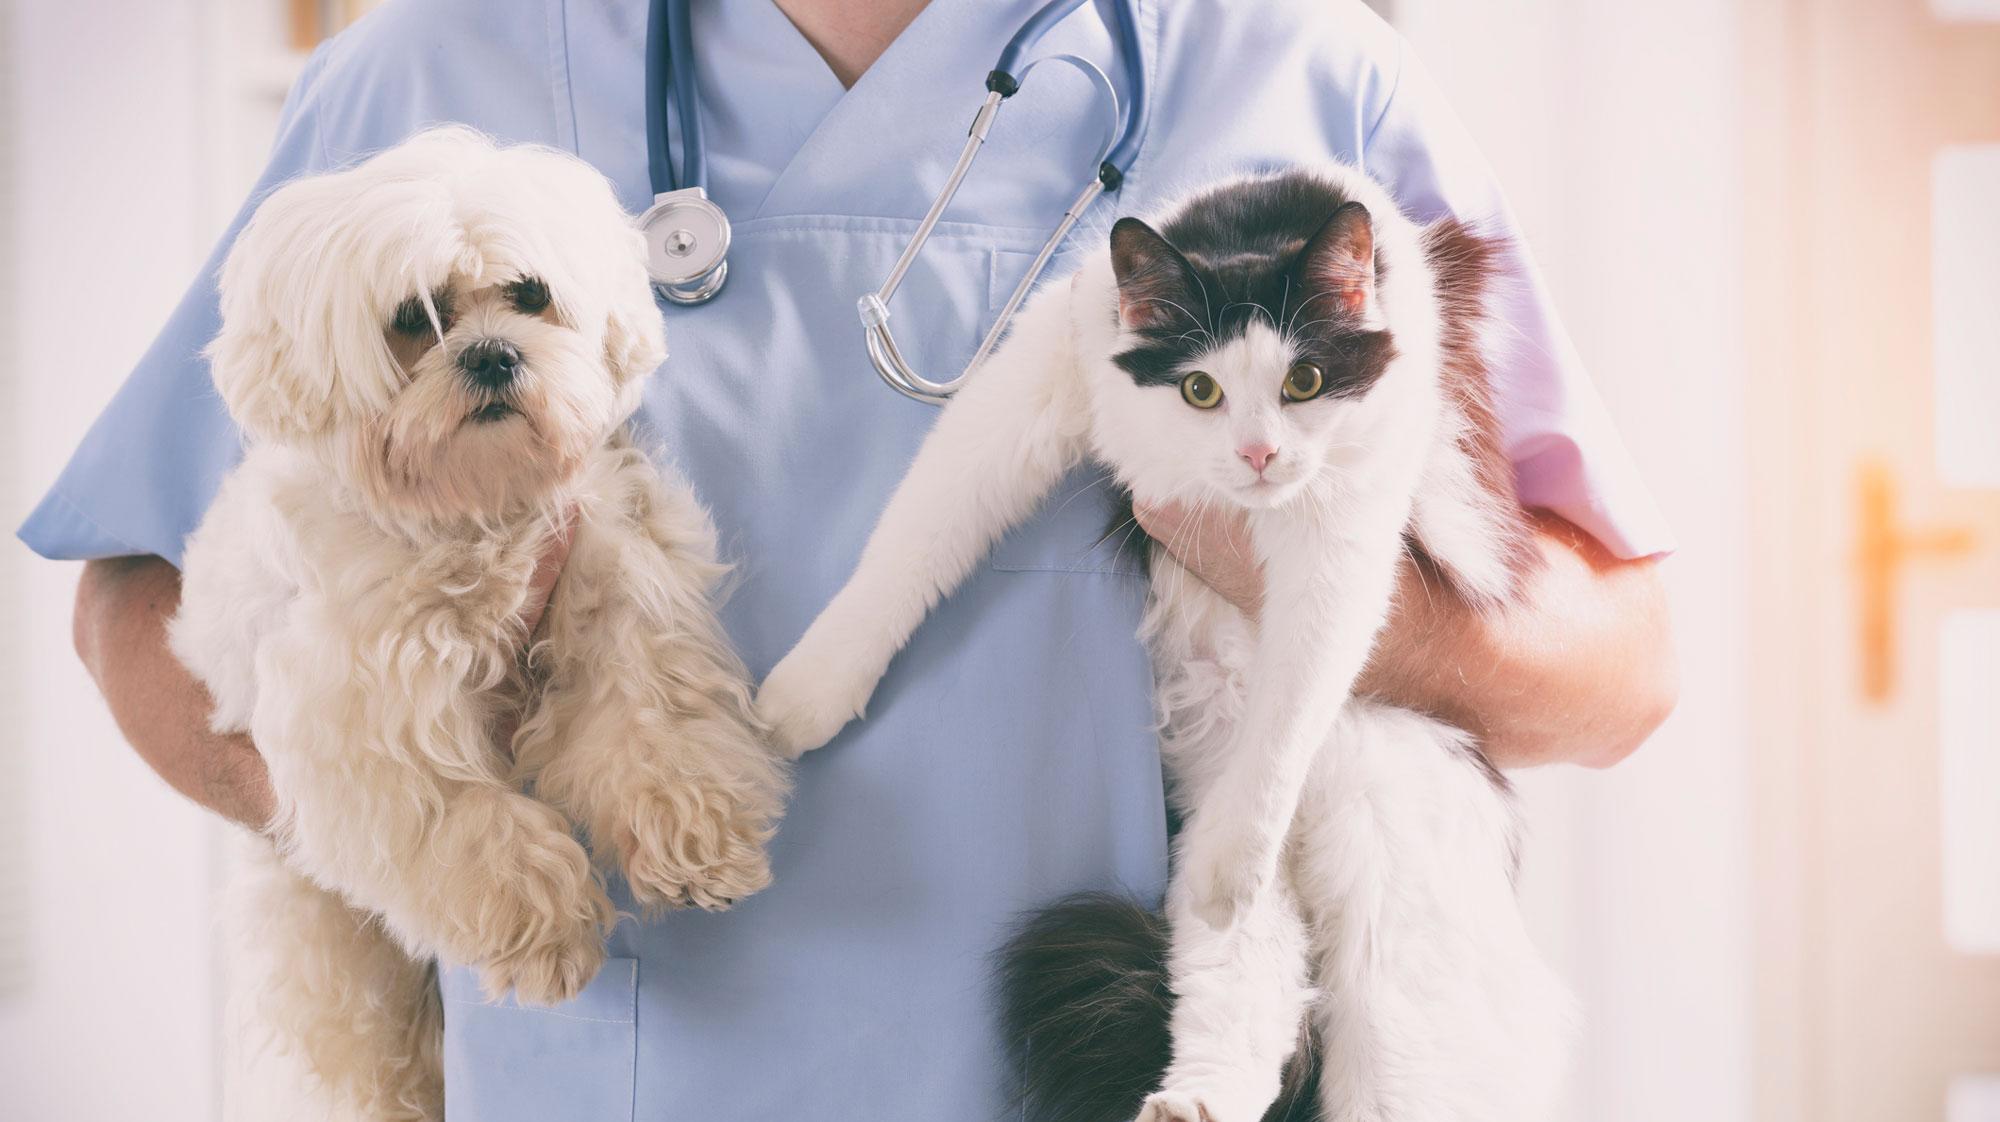 Vet tech holding a cat and dog